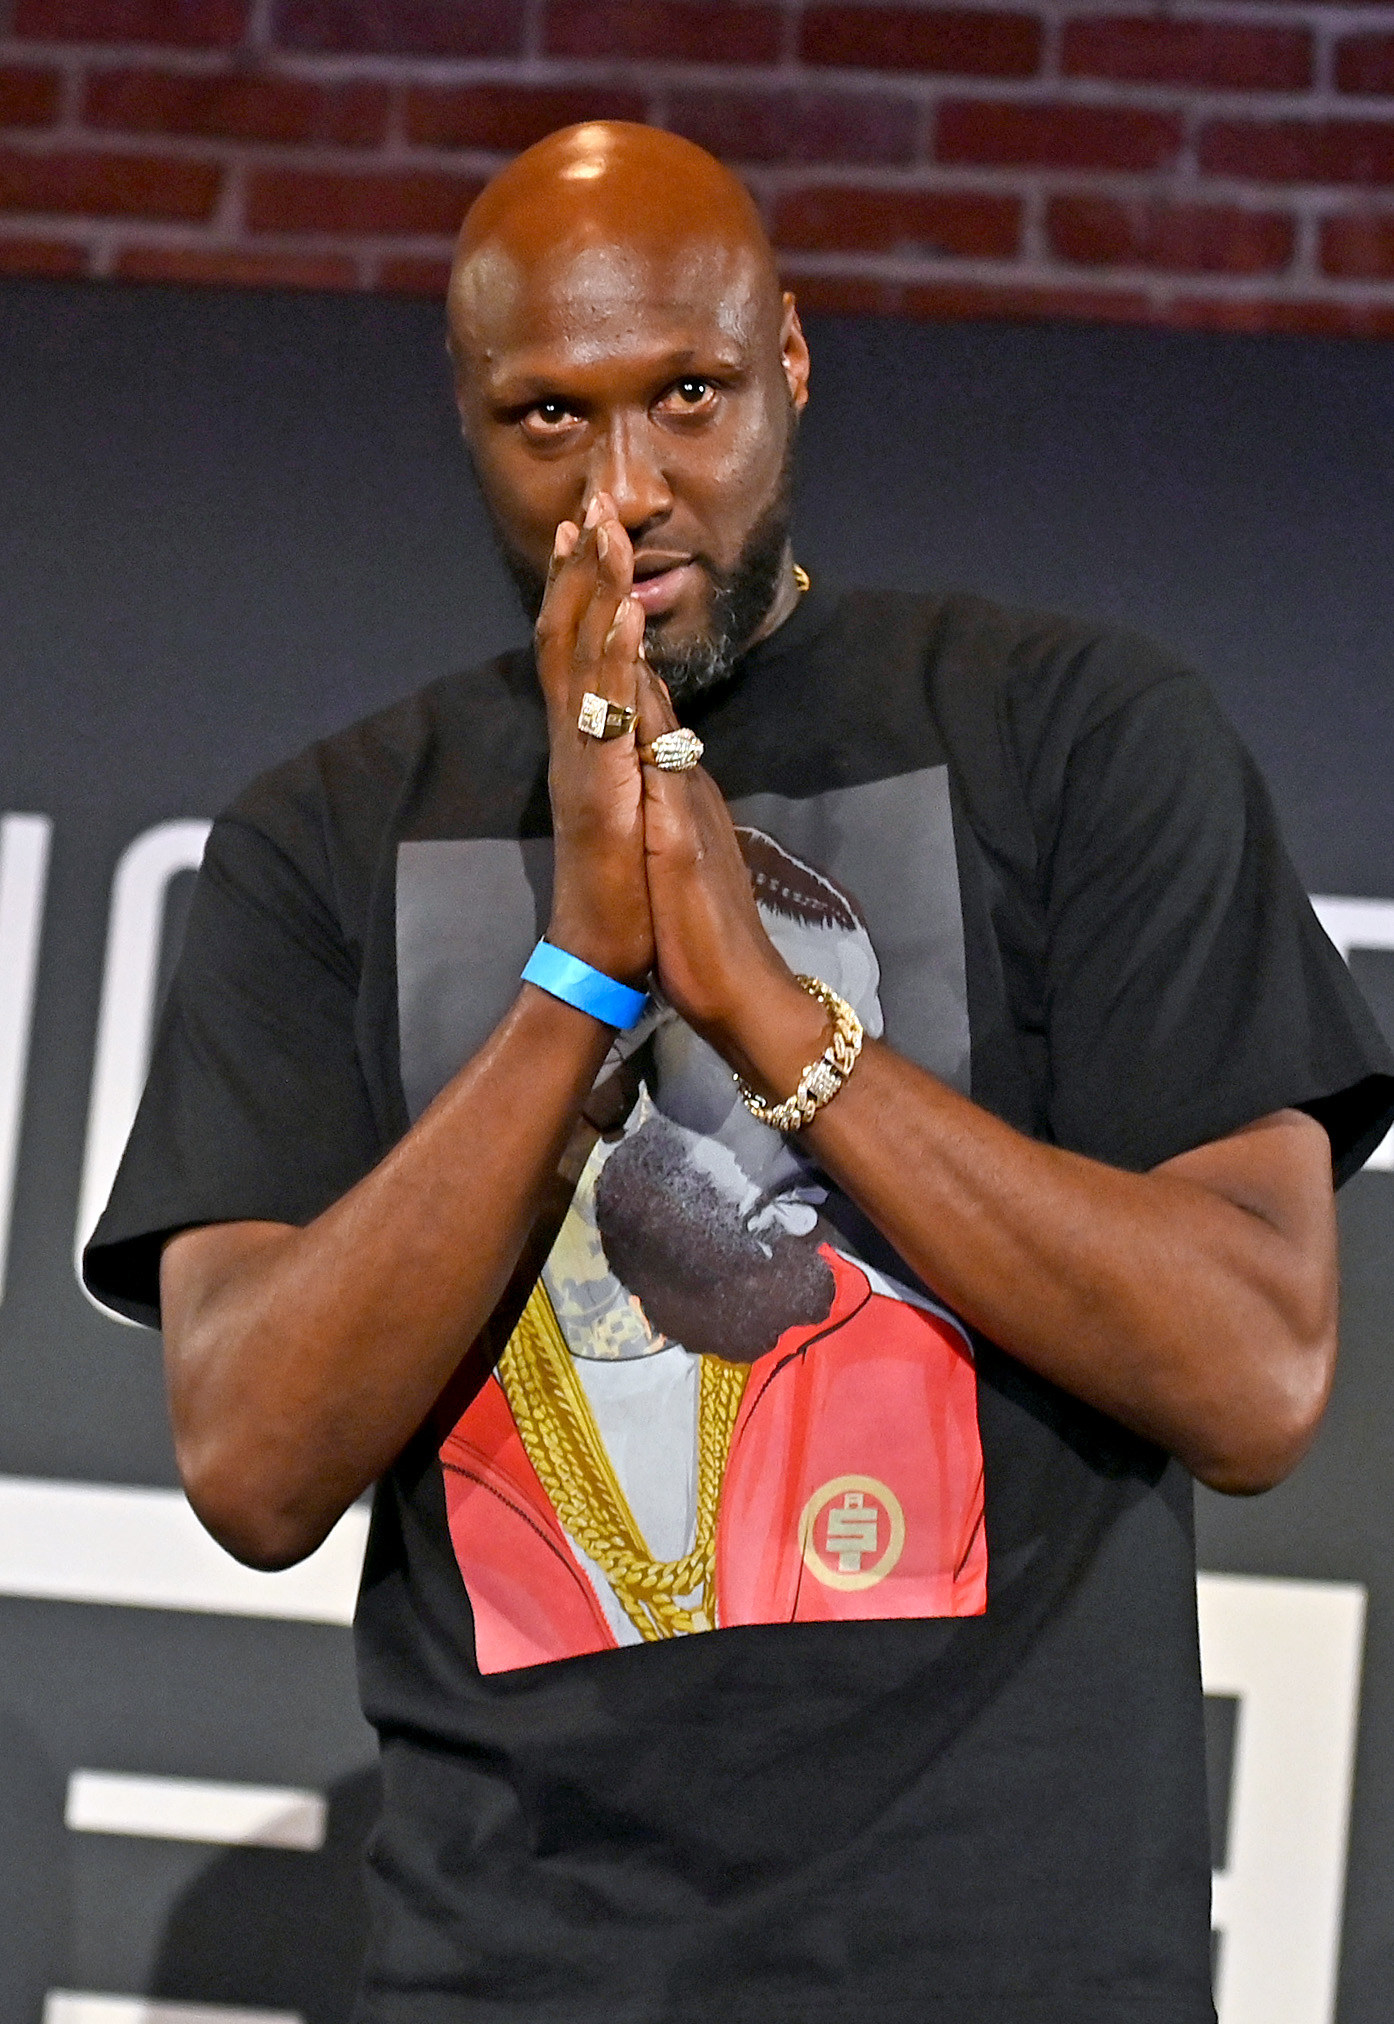 A closeup of Lamar with his hands pressed together